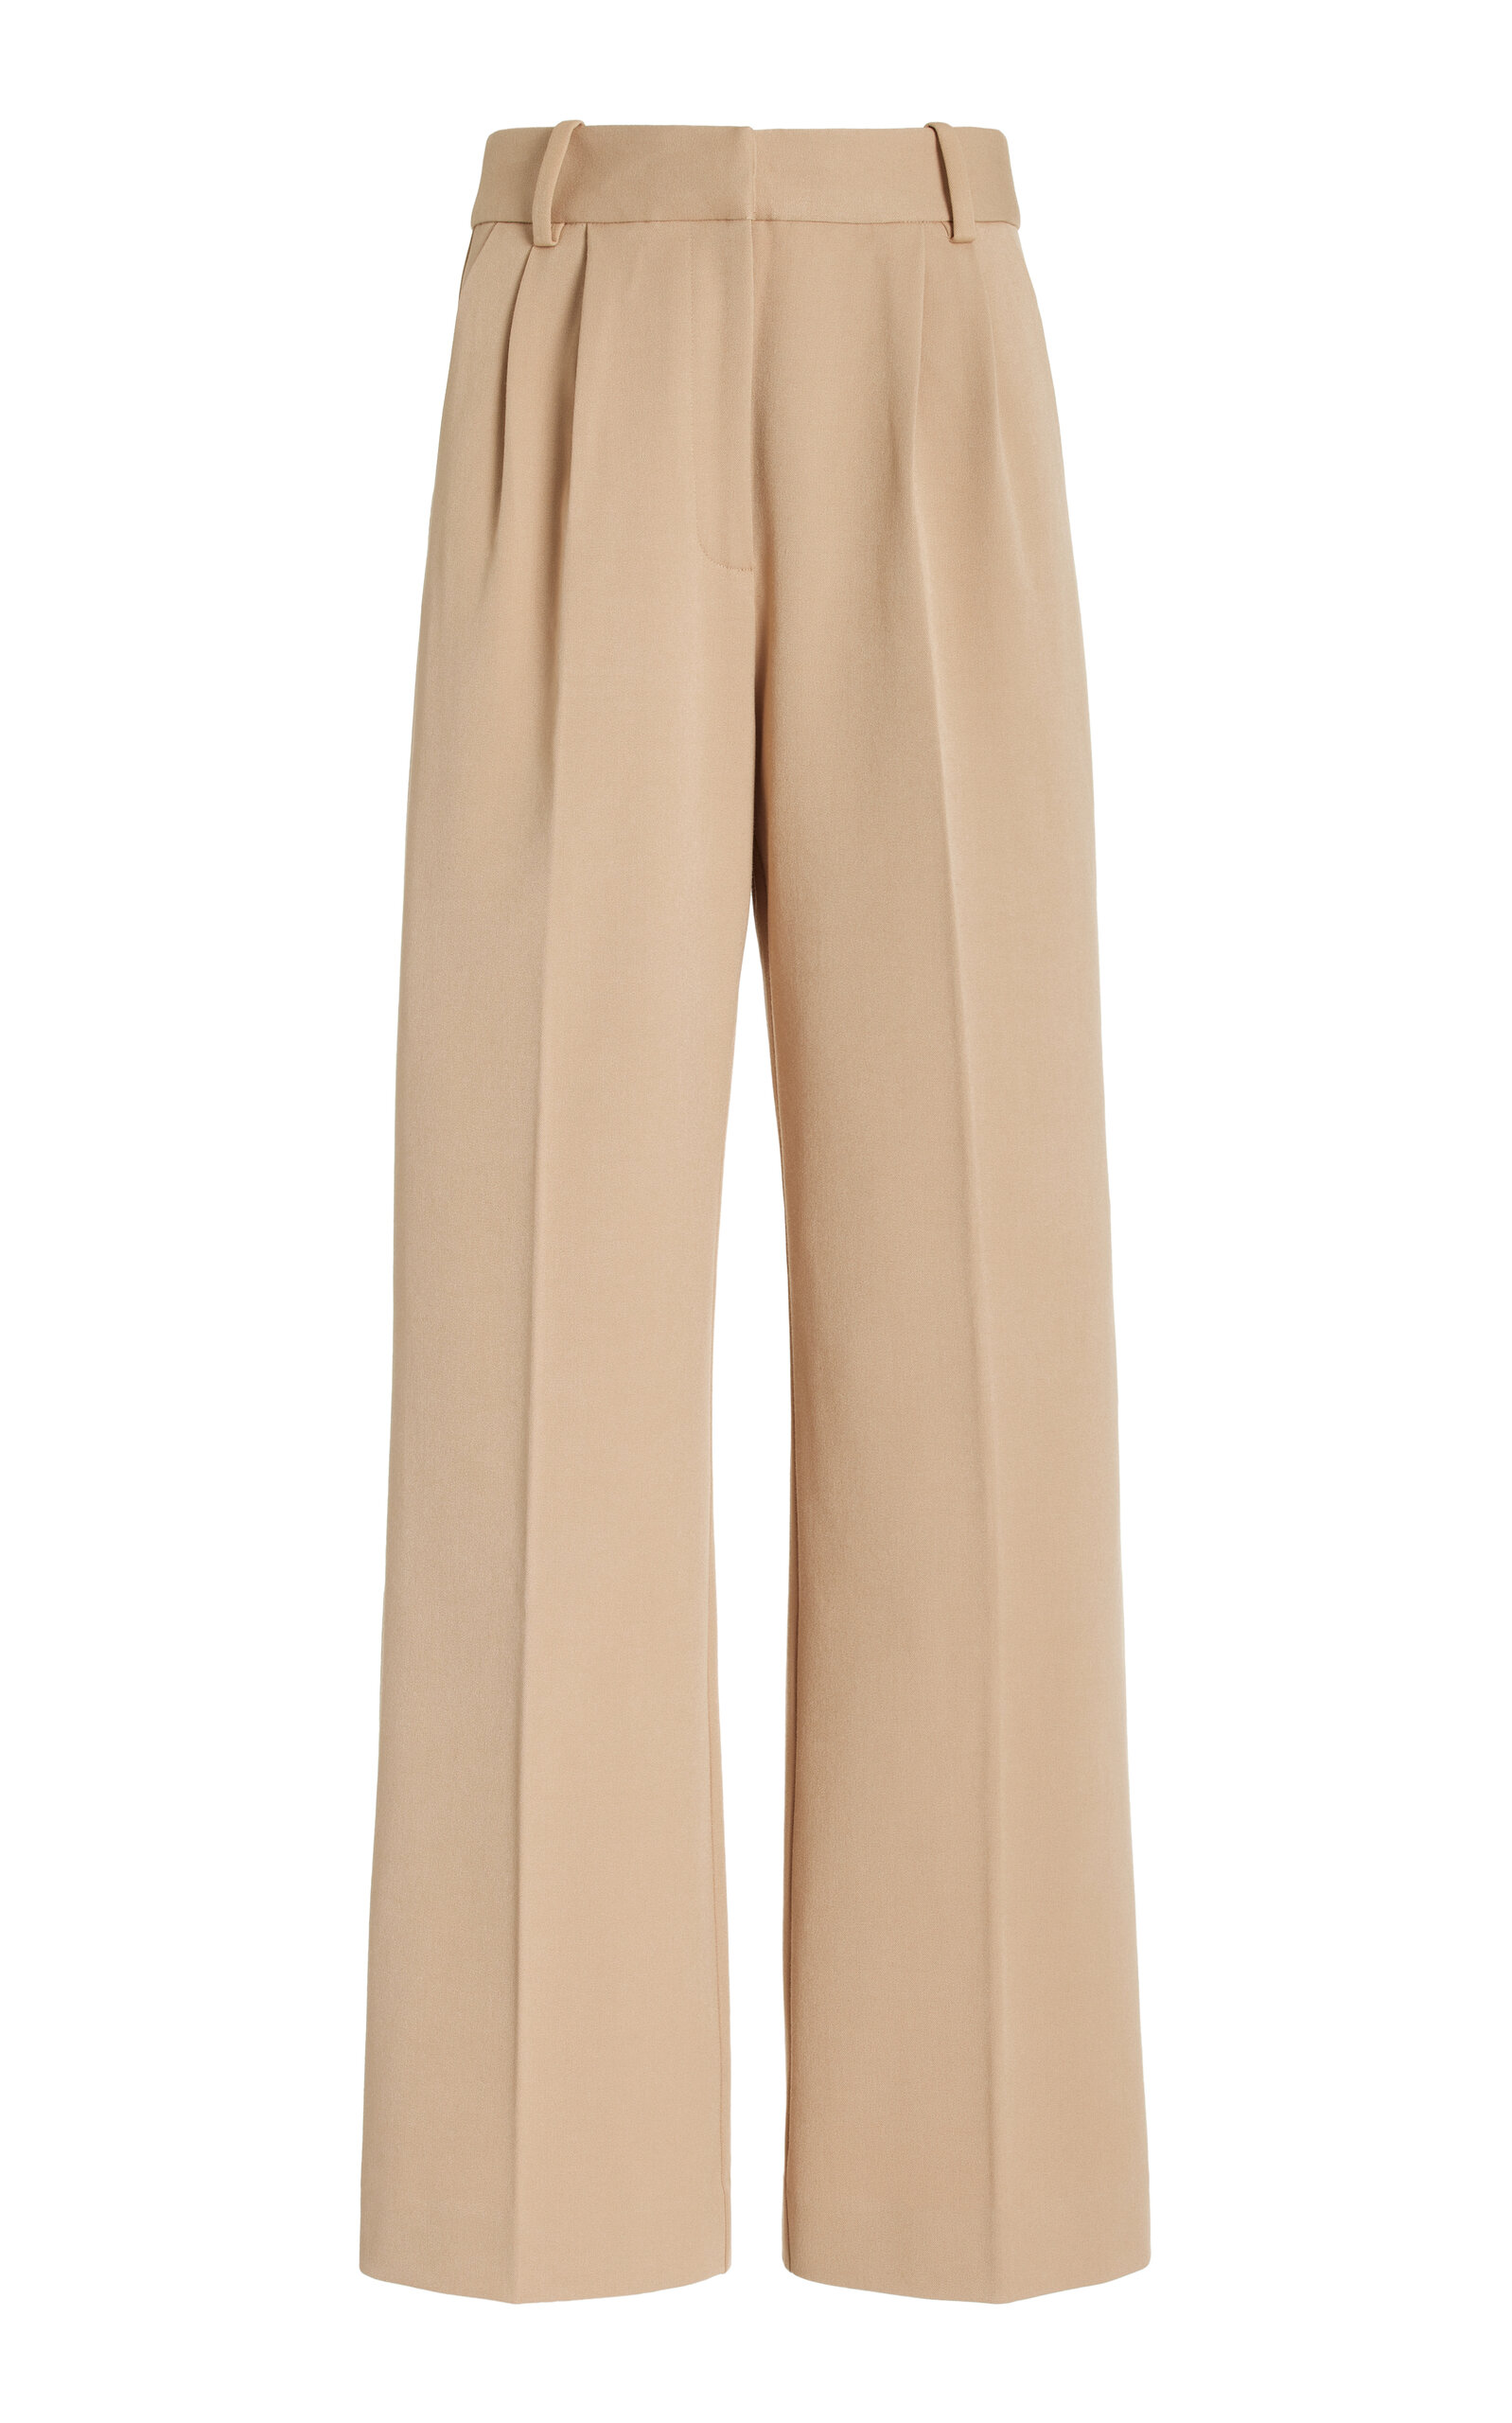 The Favorite Shortie Pleated Pants